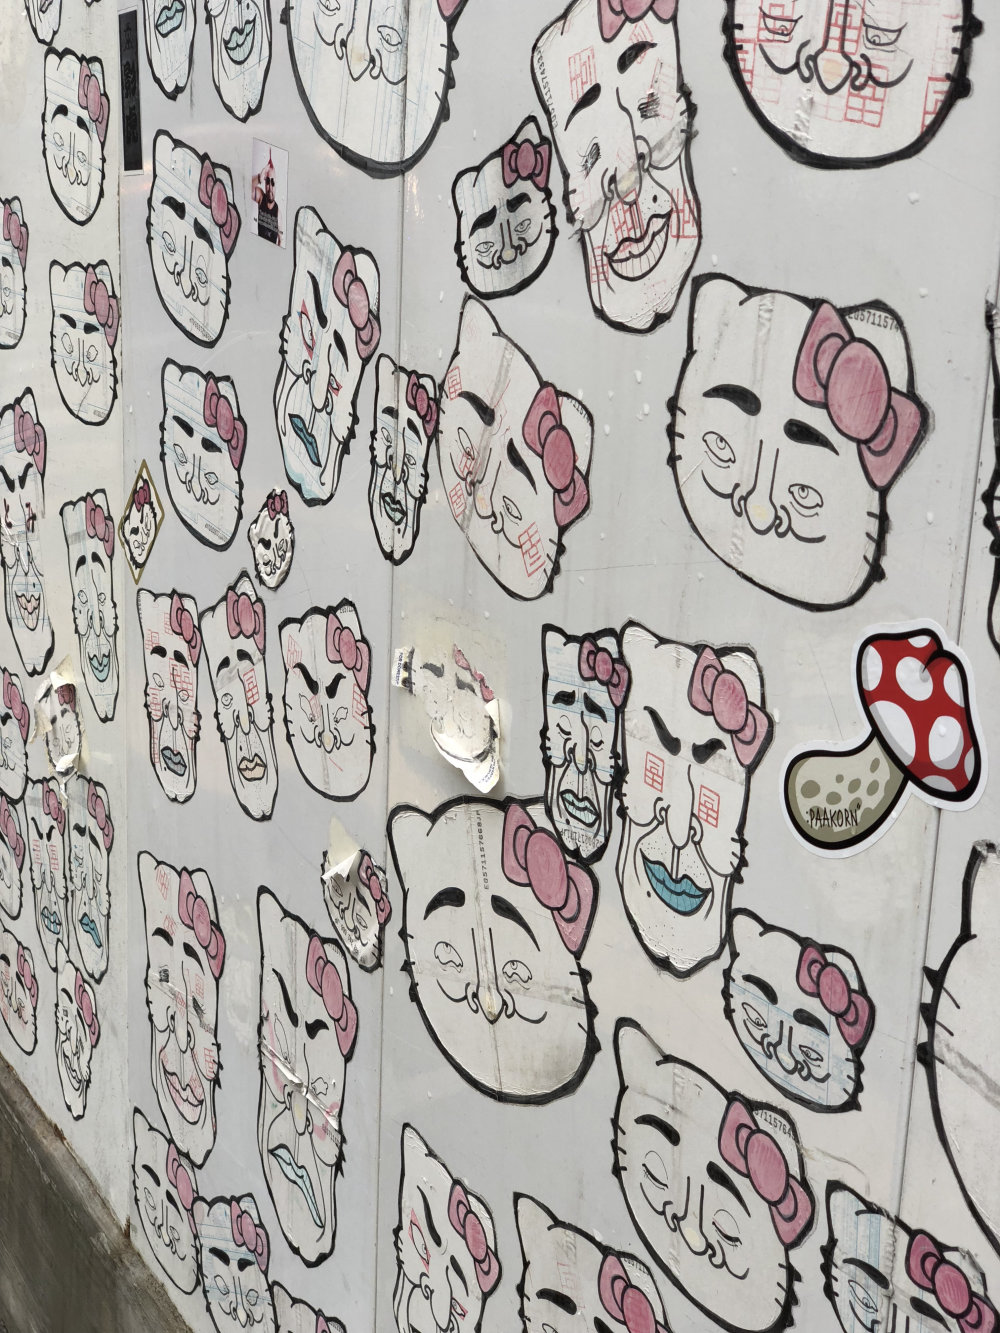 mural in Shinjuku City by artist unknown.